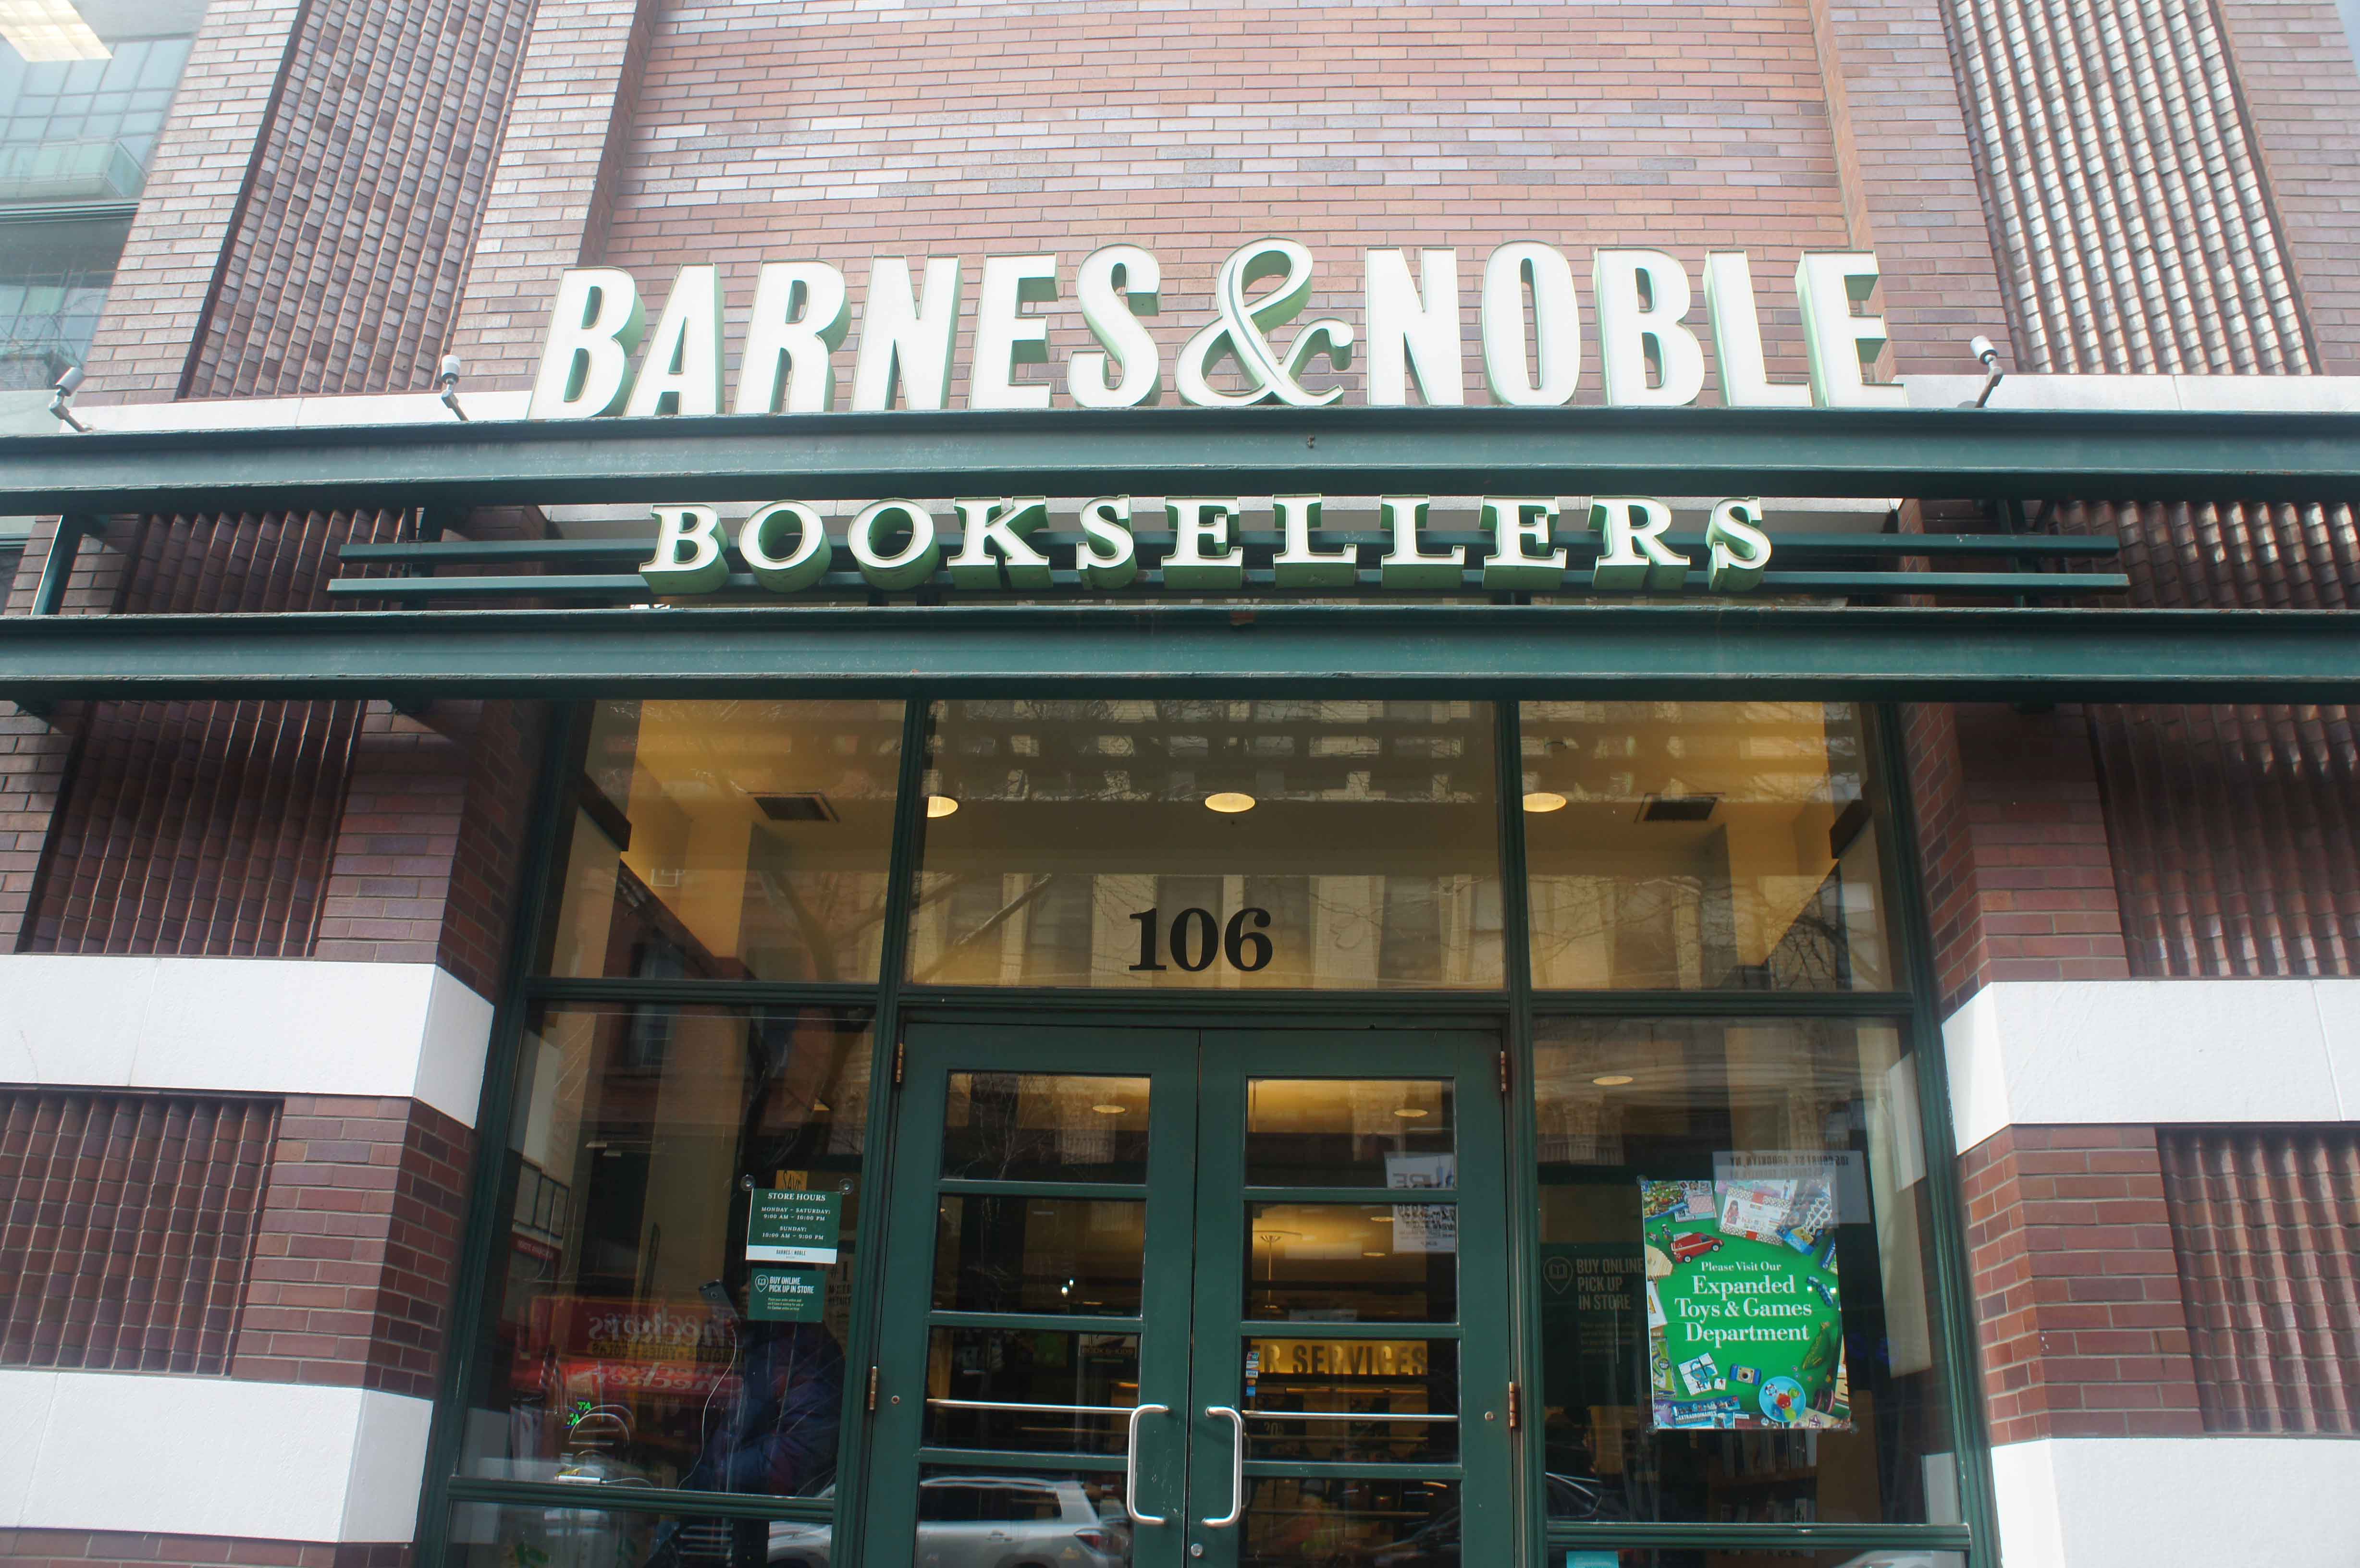 From local shops to nationally loved brand-name stores like Barnes & Noble, shown here, Brooklyn Heights has everything you could ask for, right in your neighborhood